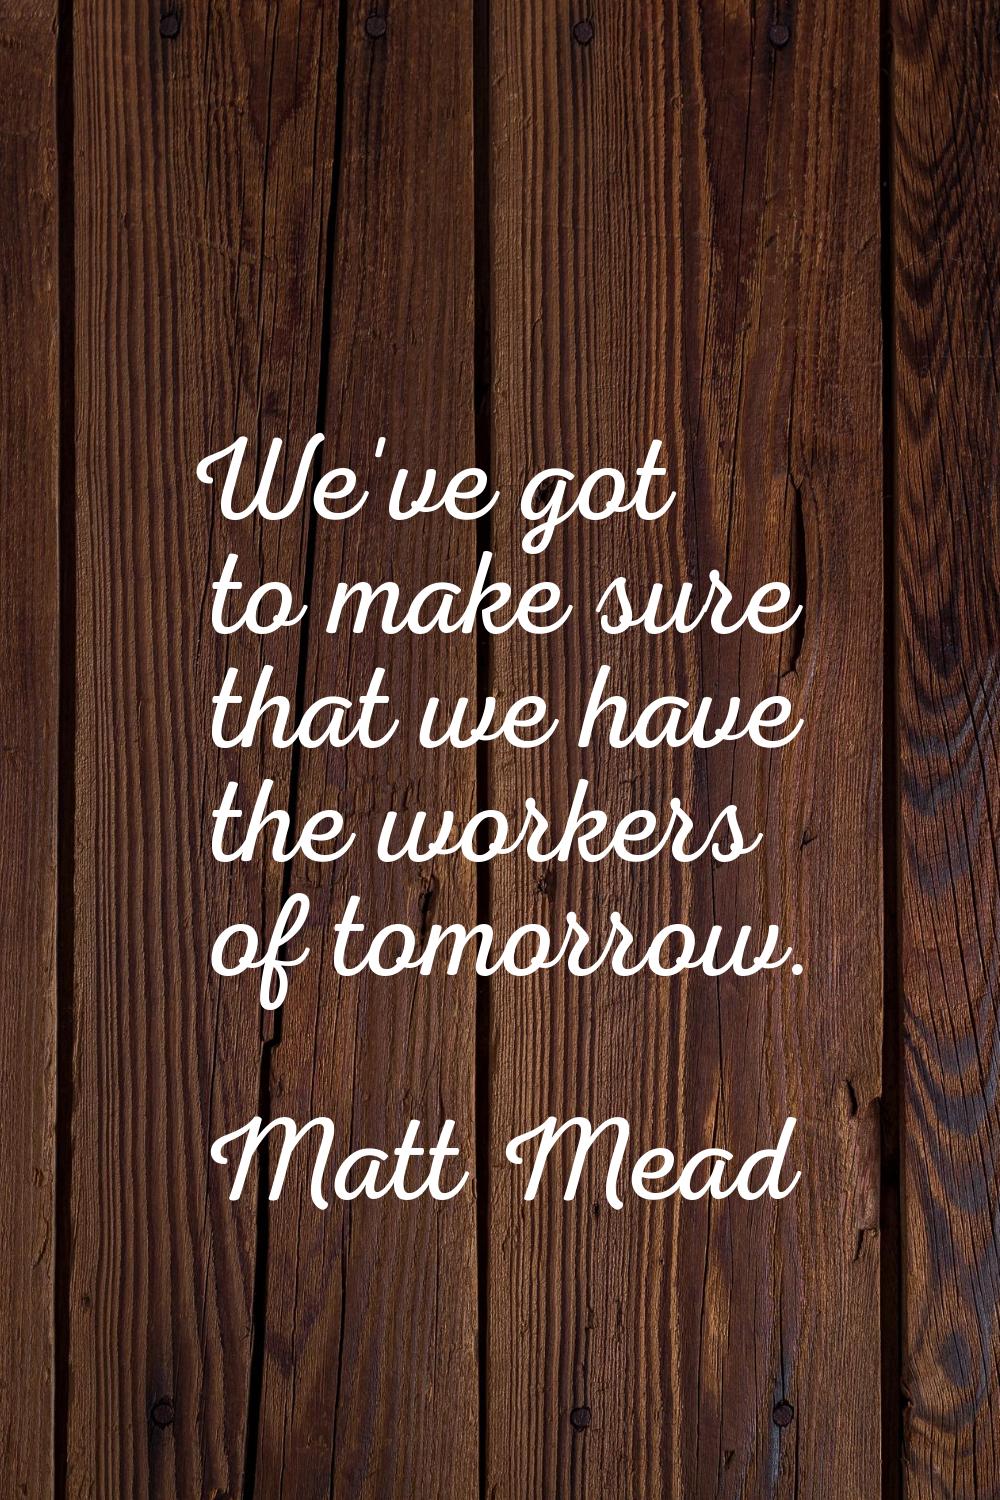 We've got to make sure that we have the workers of tomorrow.